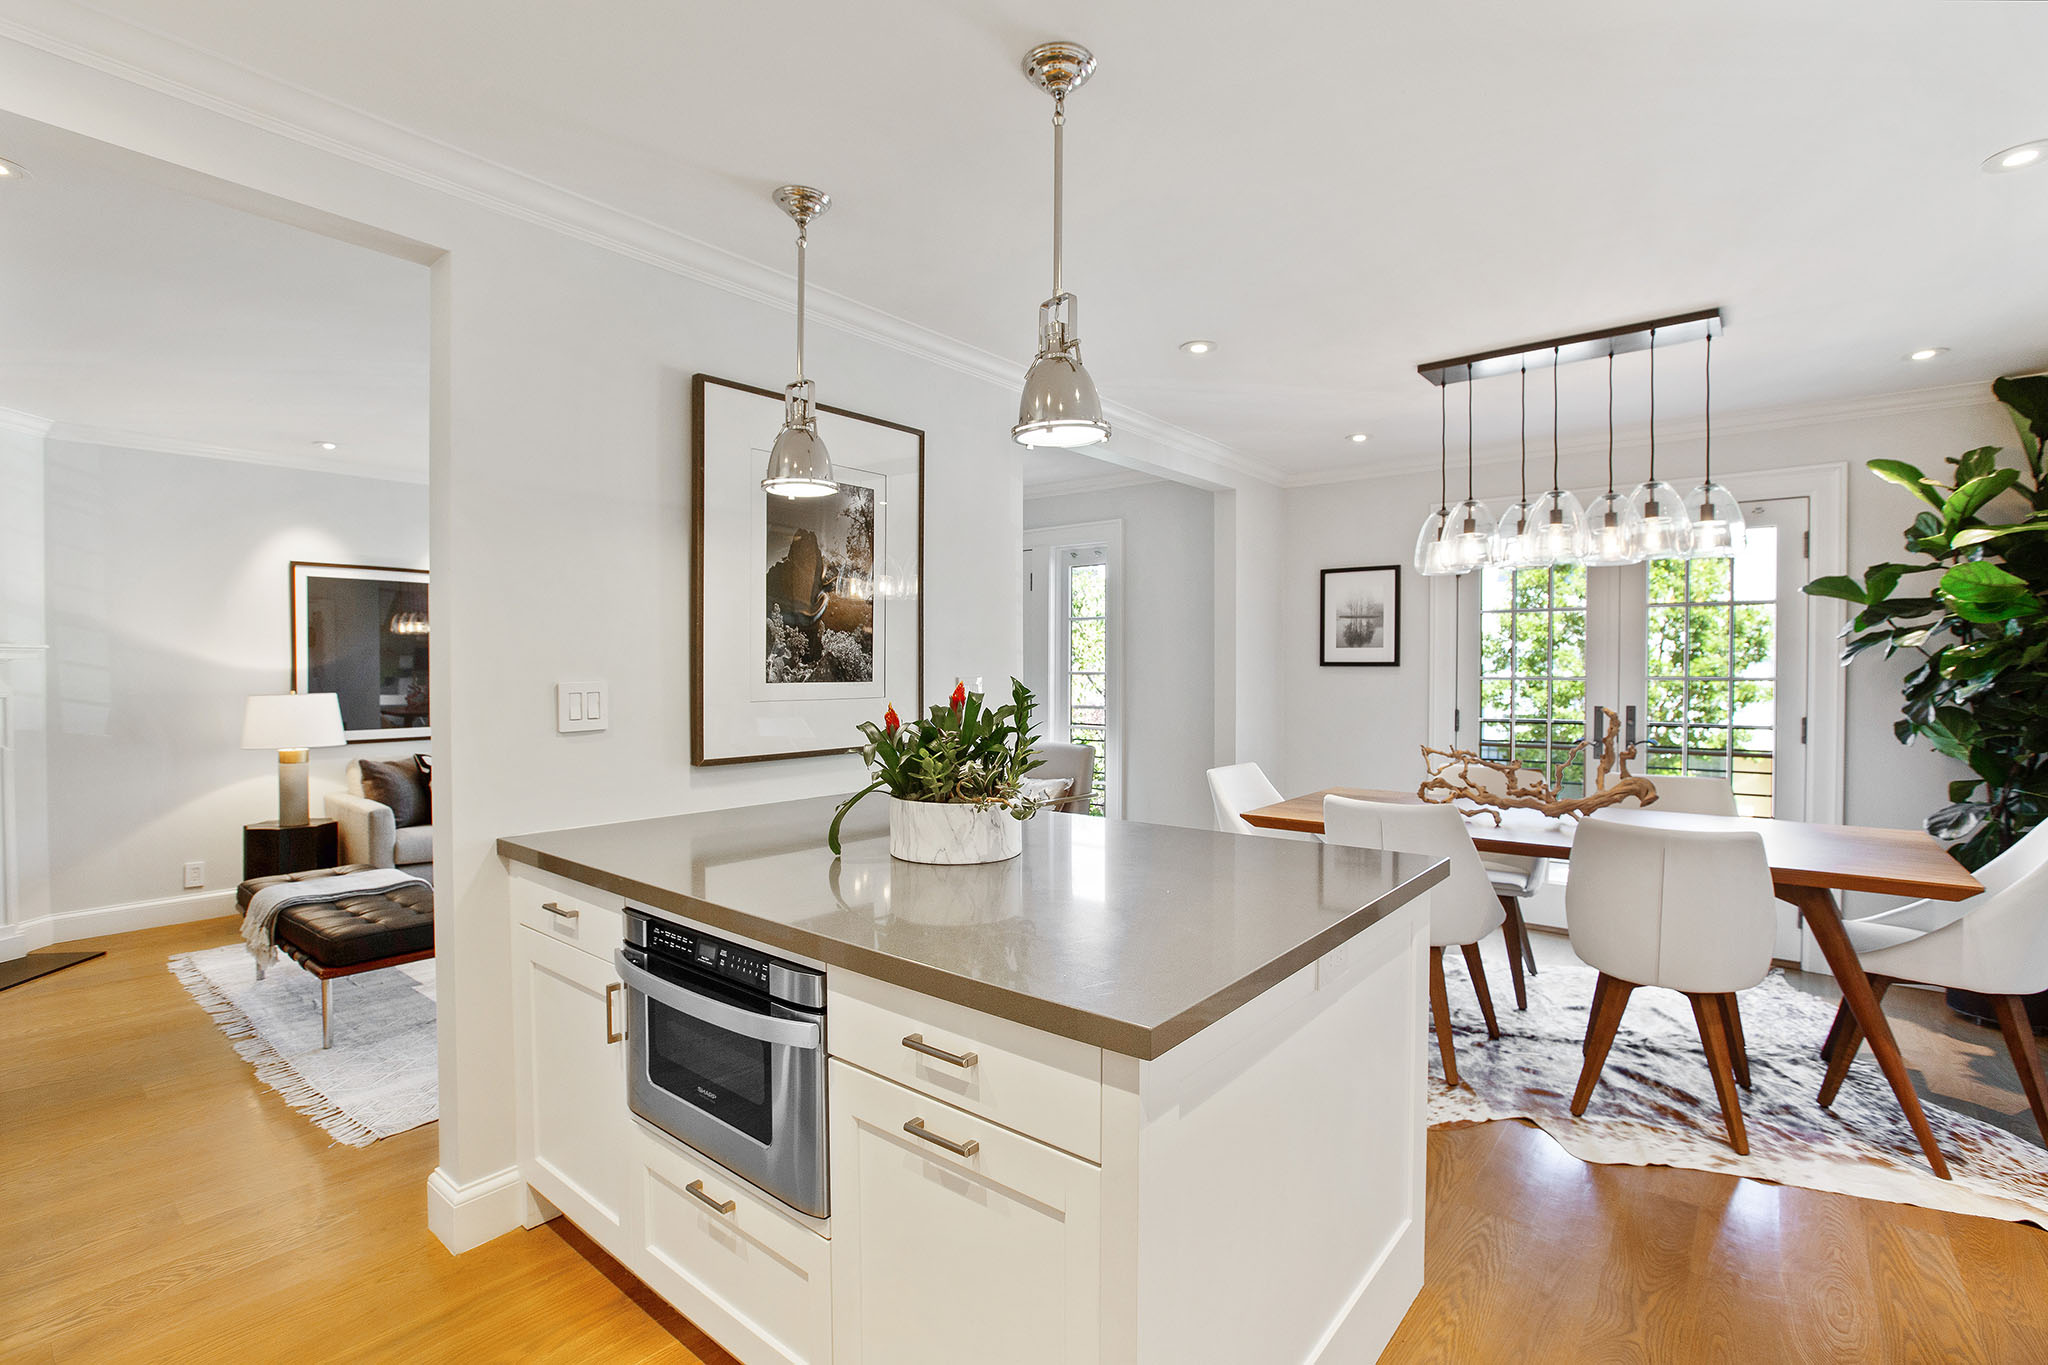 Property Photo: Photo looking over kitchen island with dining space to the right and main entry to the left. 